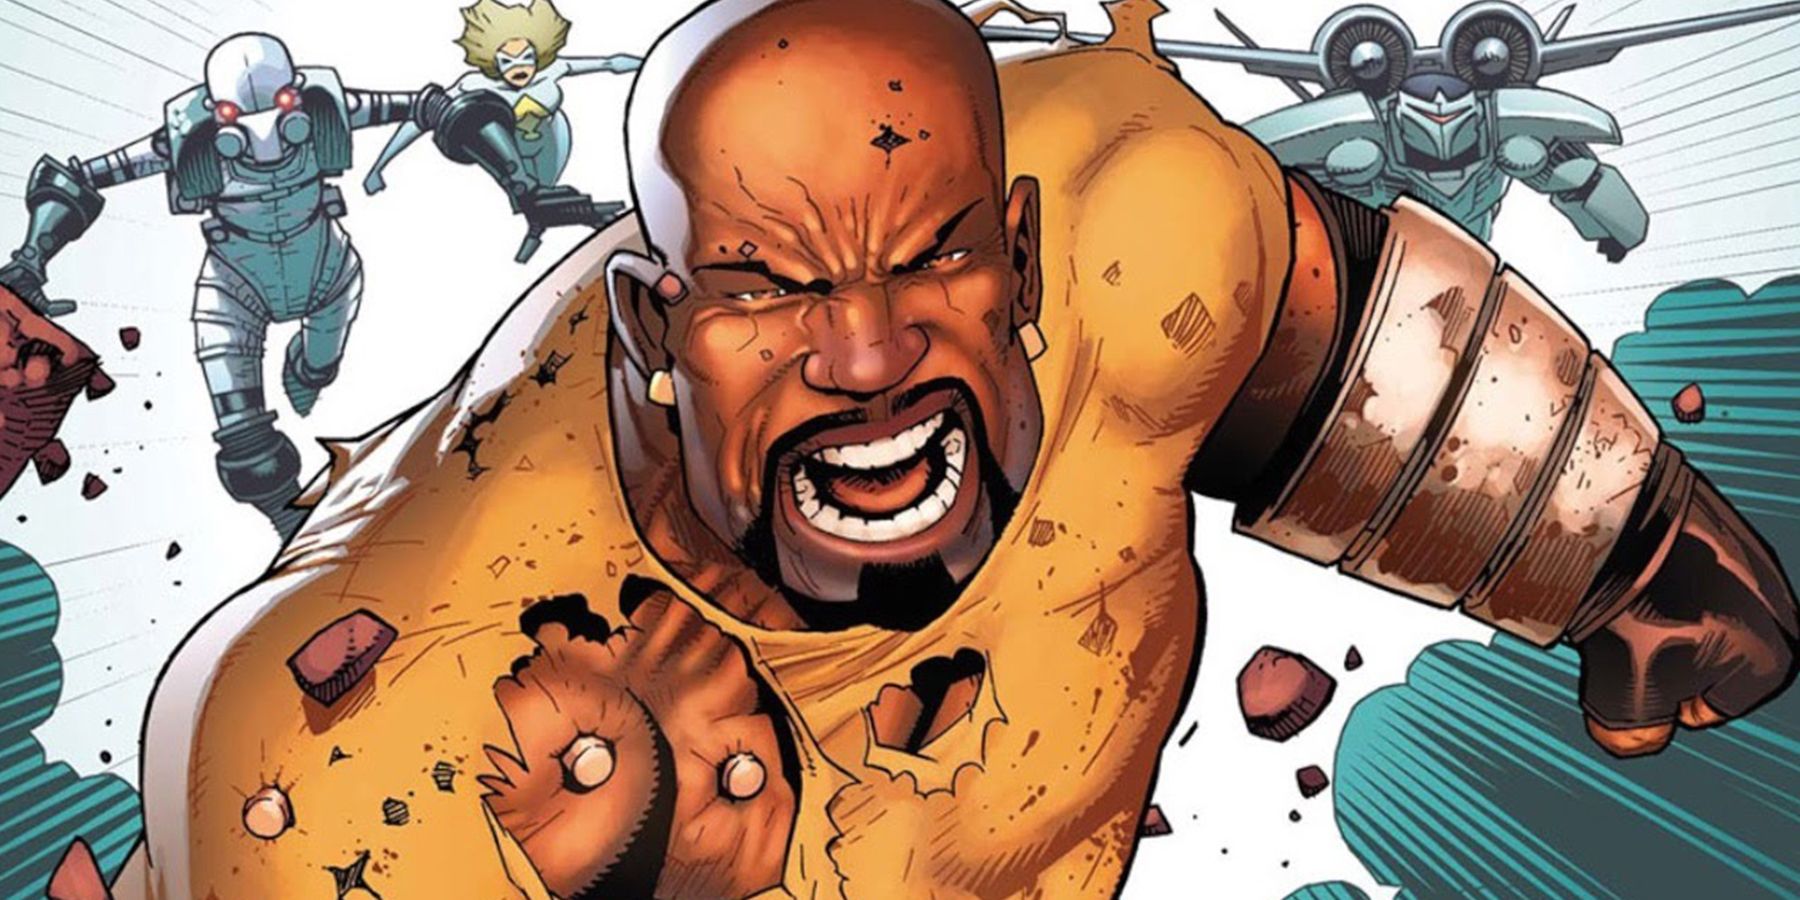 Luke Cage with the Thunderbolts